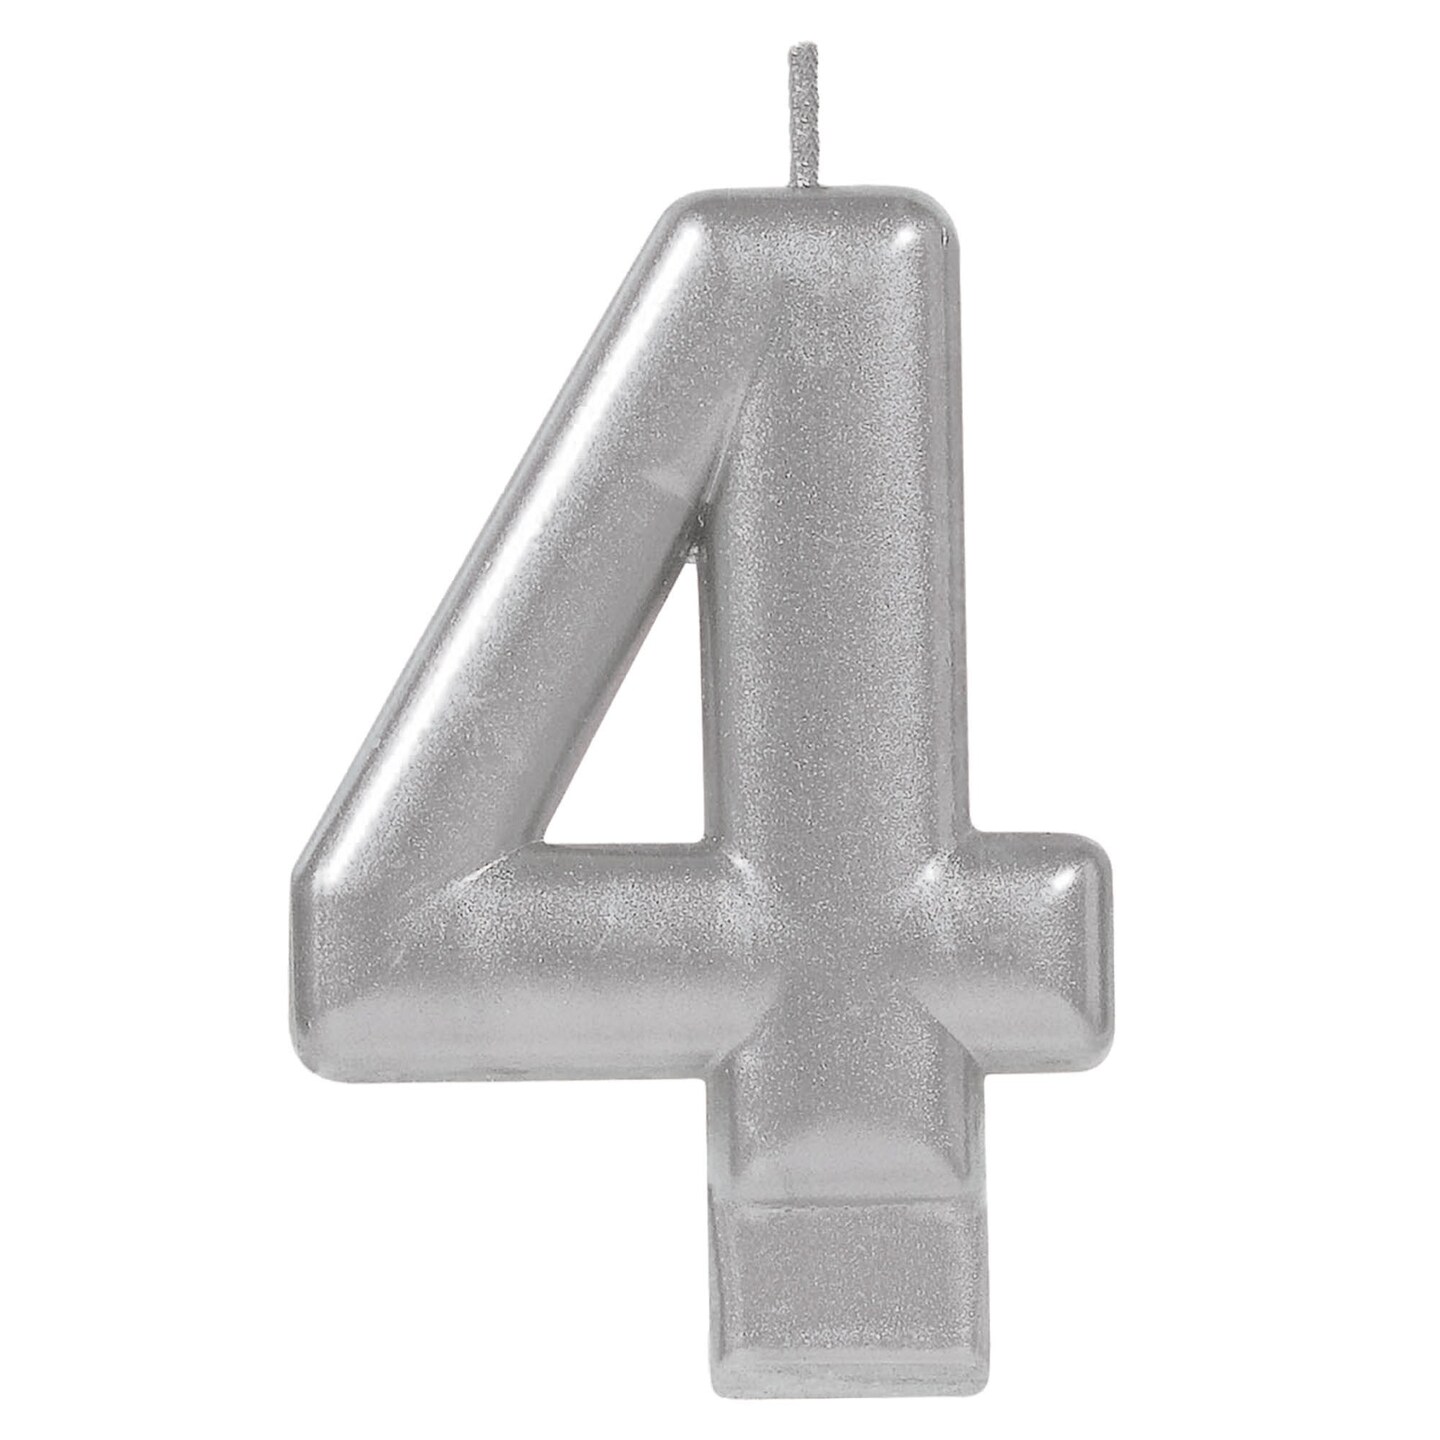 Numeral Metallic Birthday Candle #4 - Silver, 1ct